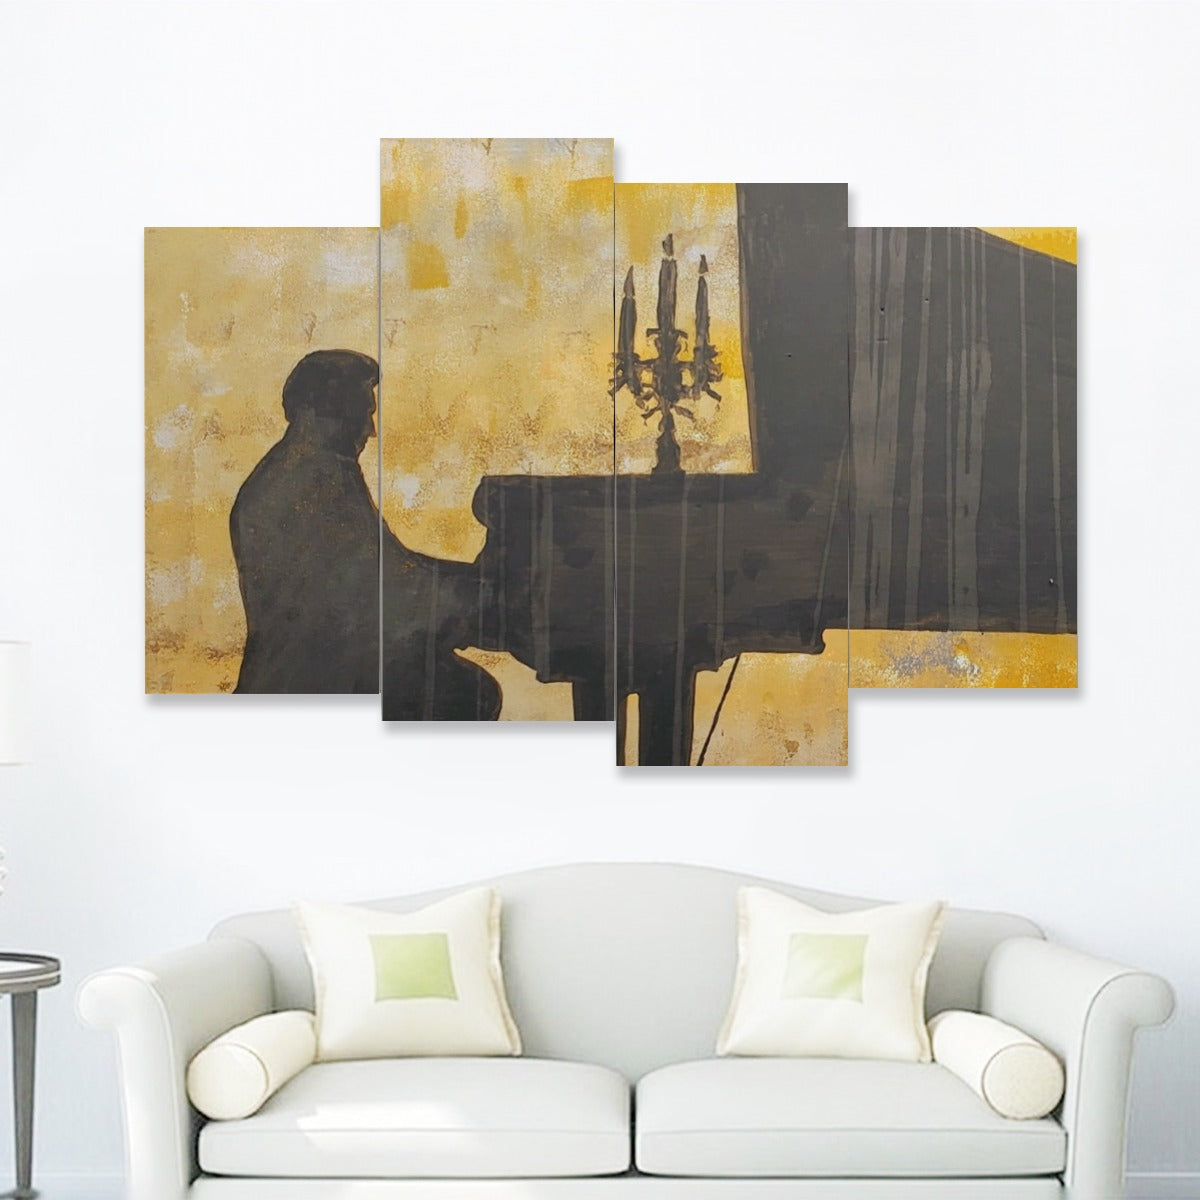 "Unmistakable" Liberace silhouette painting 4-panel print